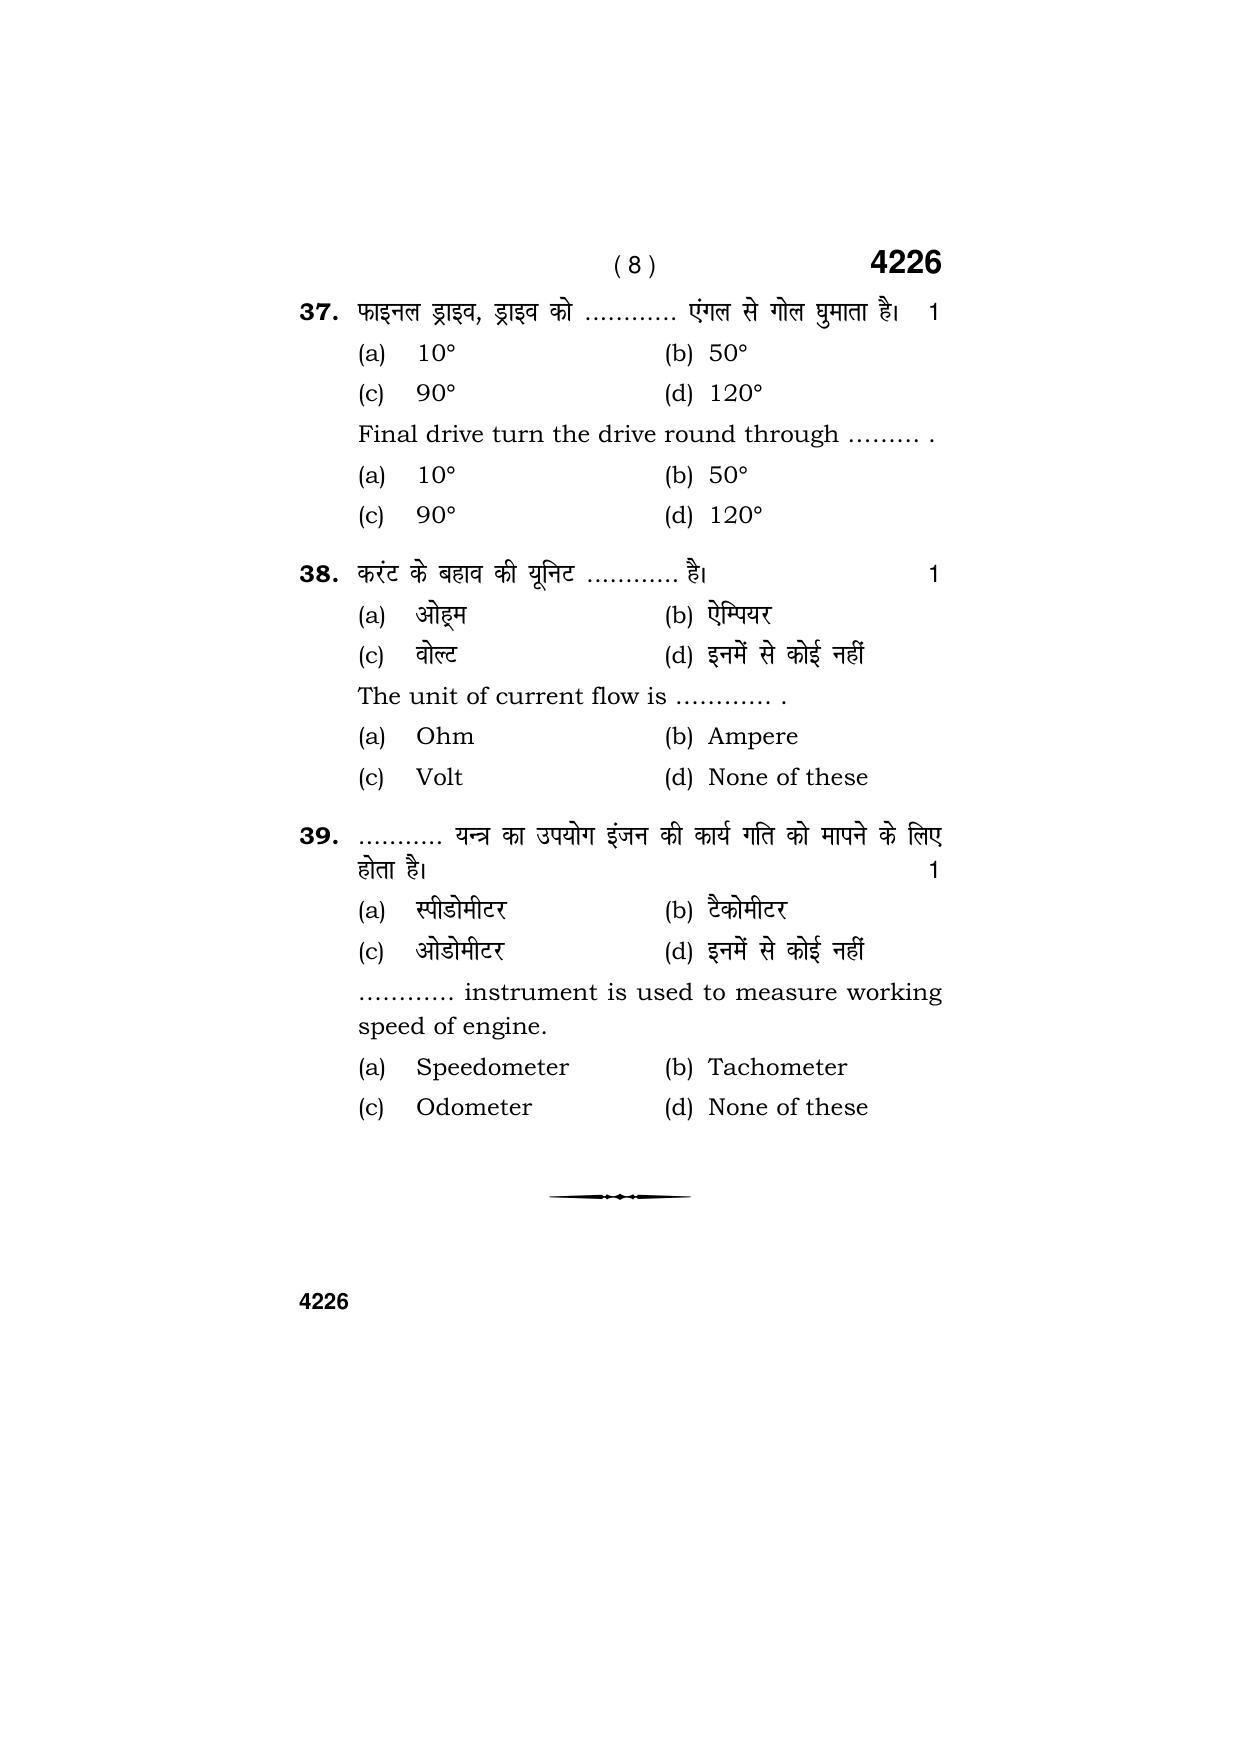 Haryana Board HBSE Class 10 Automobile 2019 Question Paper - Page 8